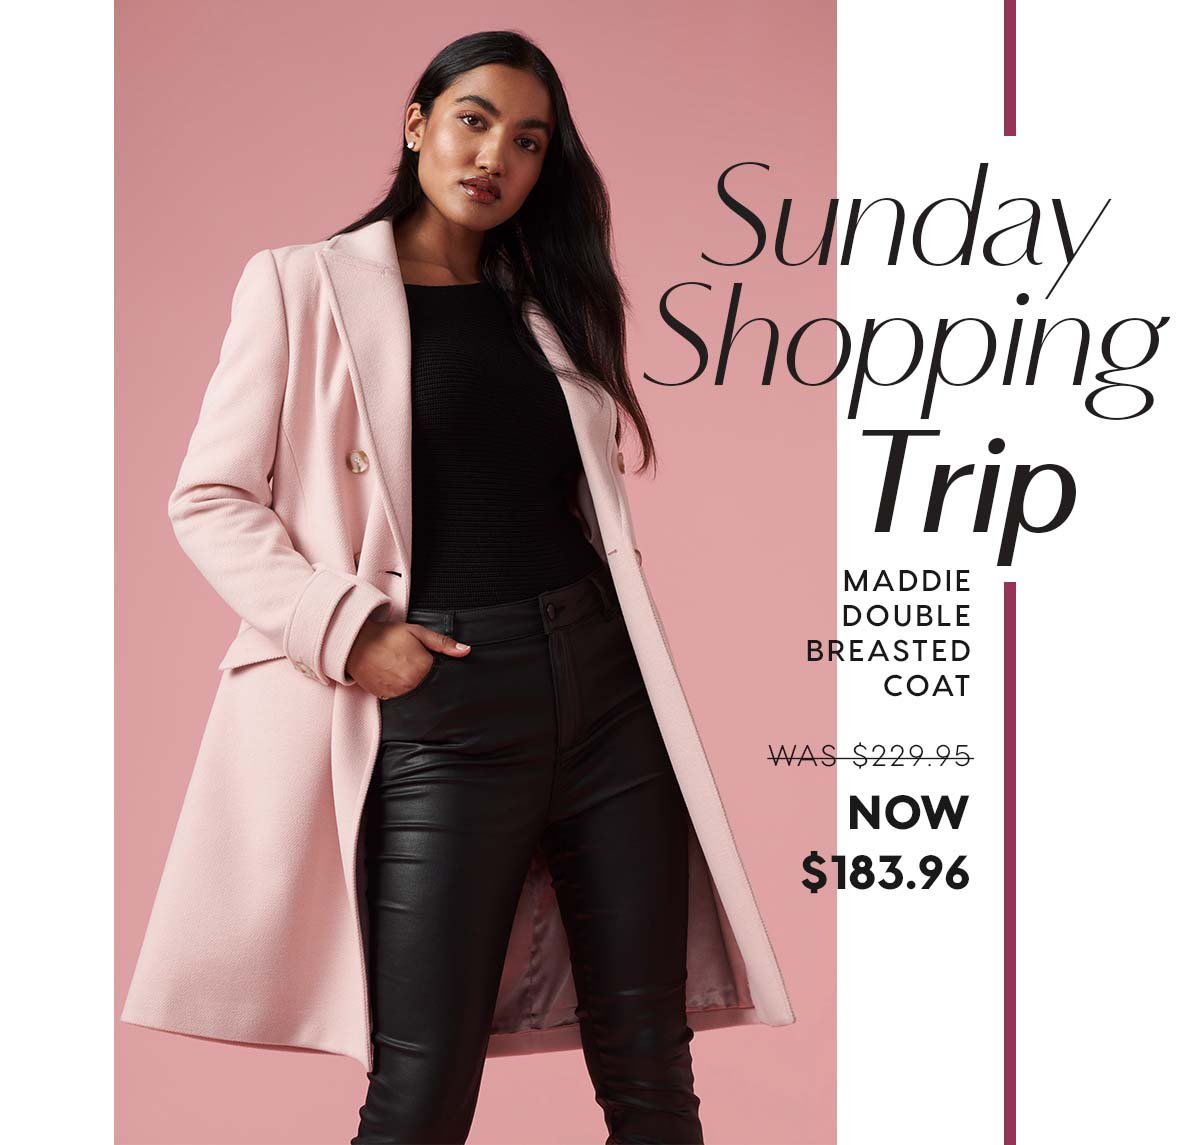 Sunday Shopping Trip. Maddie Double Breasted Coat  WAS $229.95 NOW  $183.96